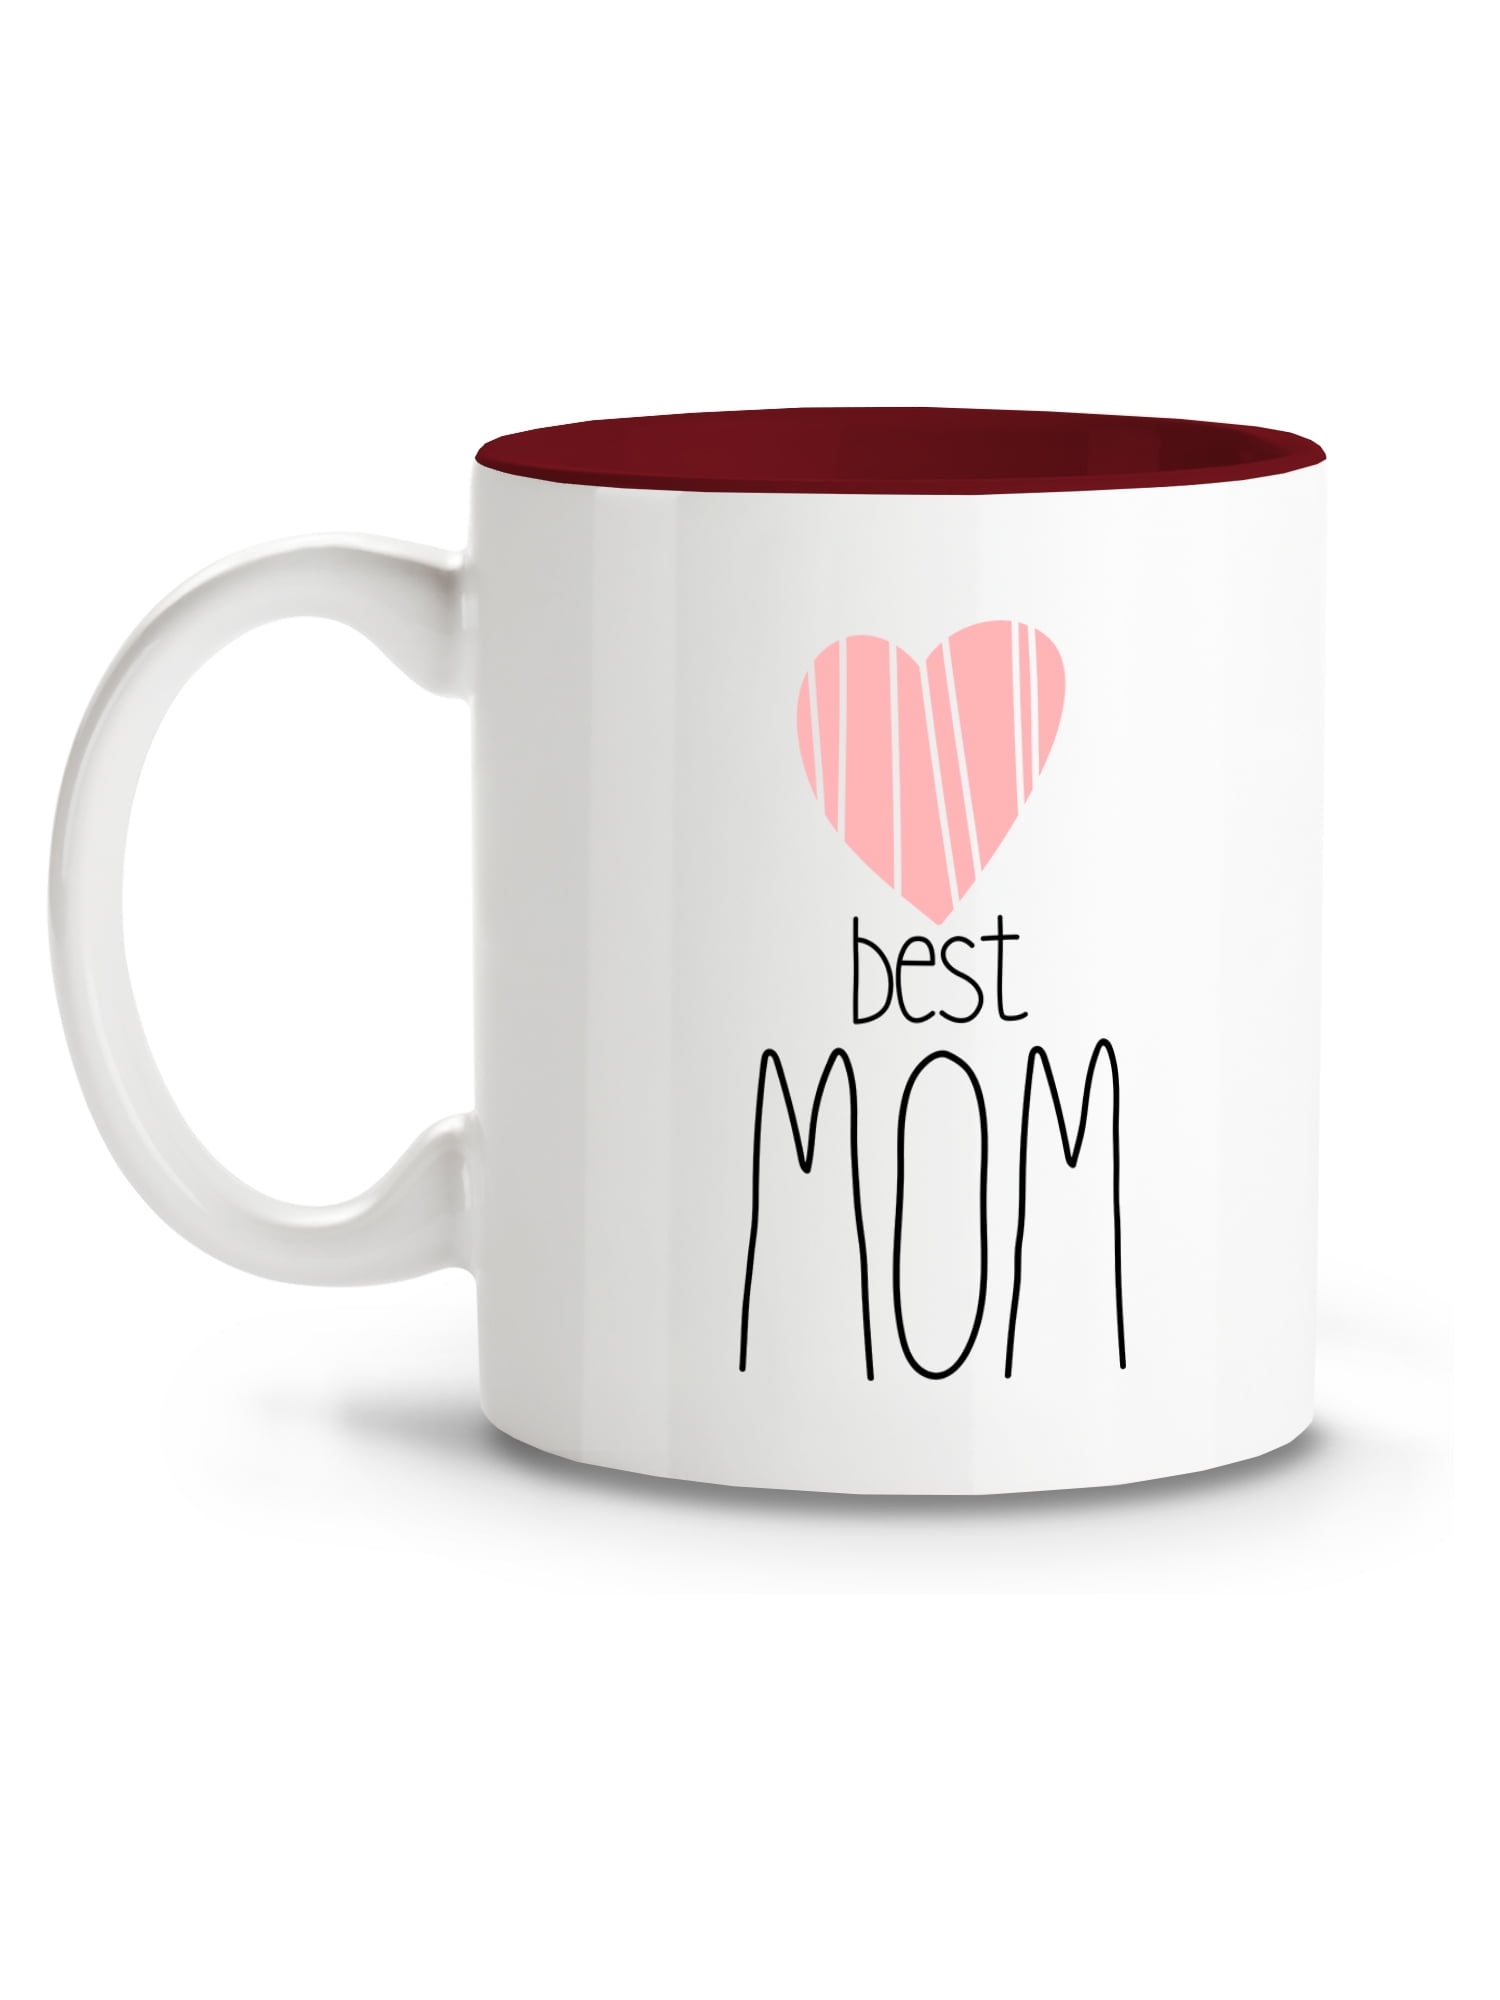 Mothers Day Ideas and Funny Mom Christmas Cards & Gifts for Christmas &  Birthday Coffee Mug for Sale by merkraht